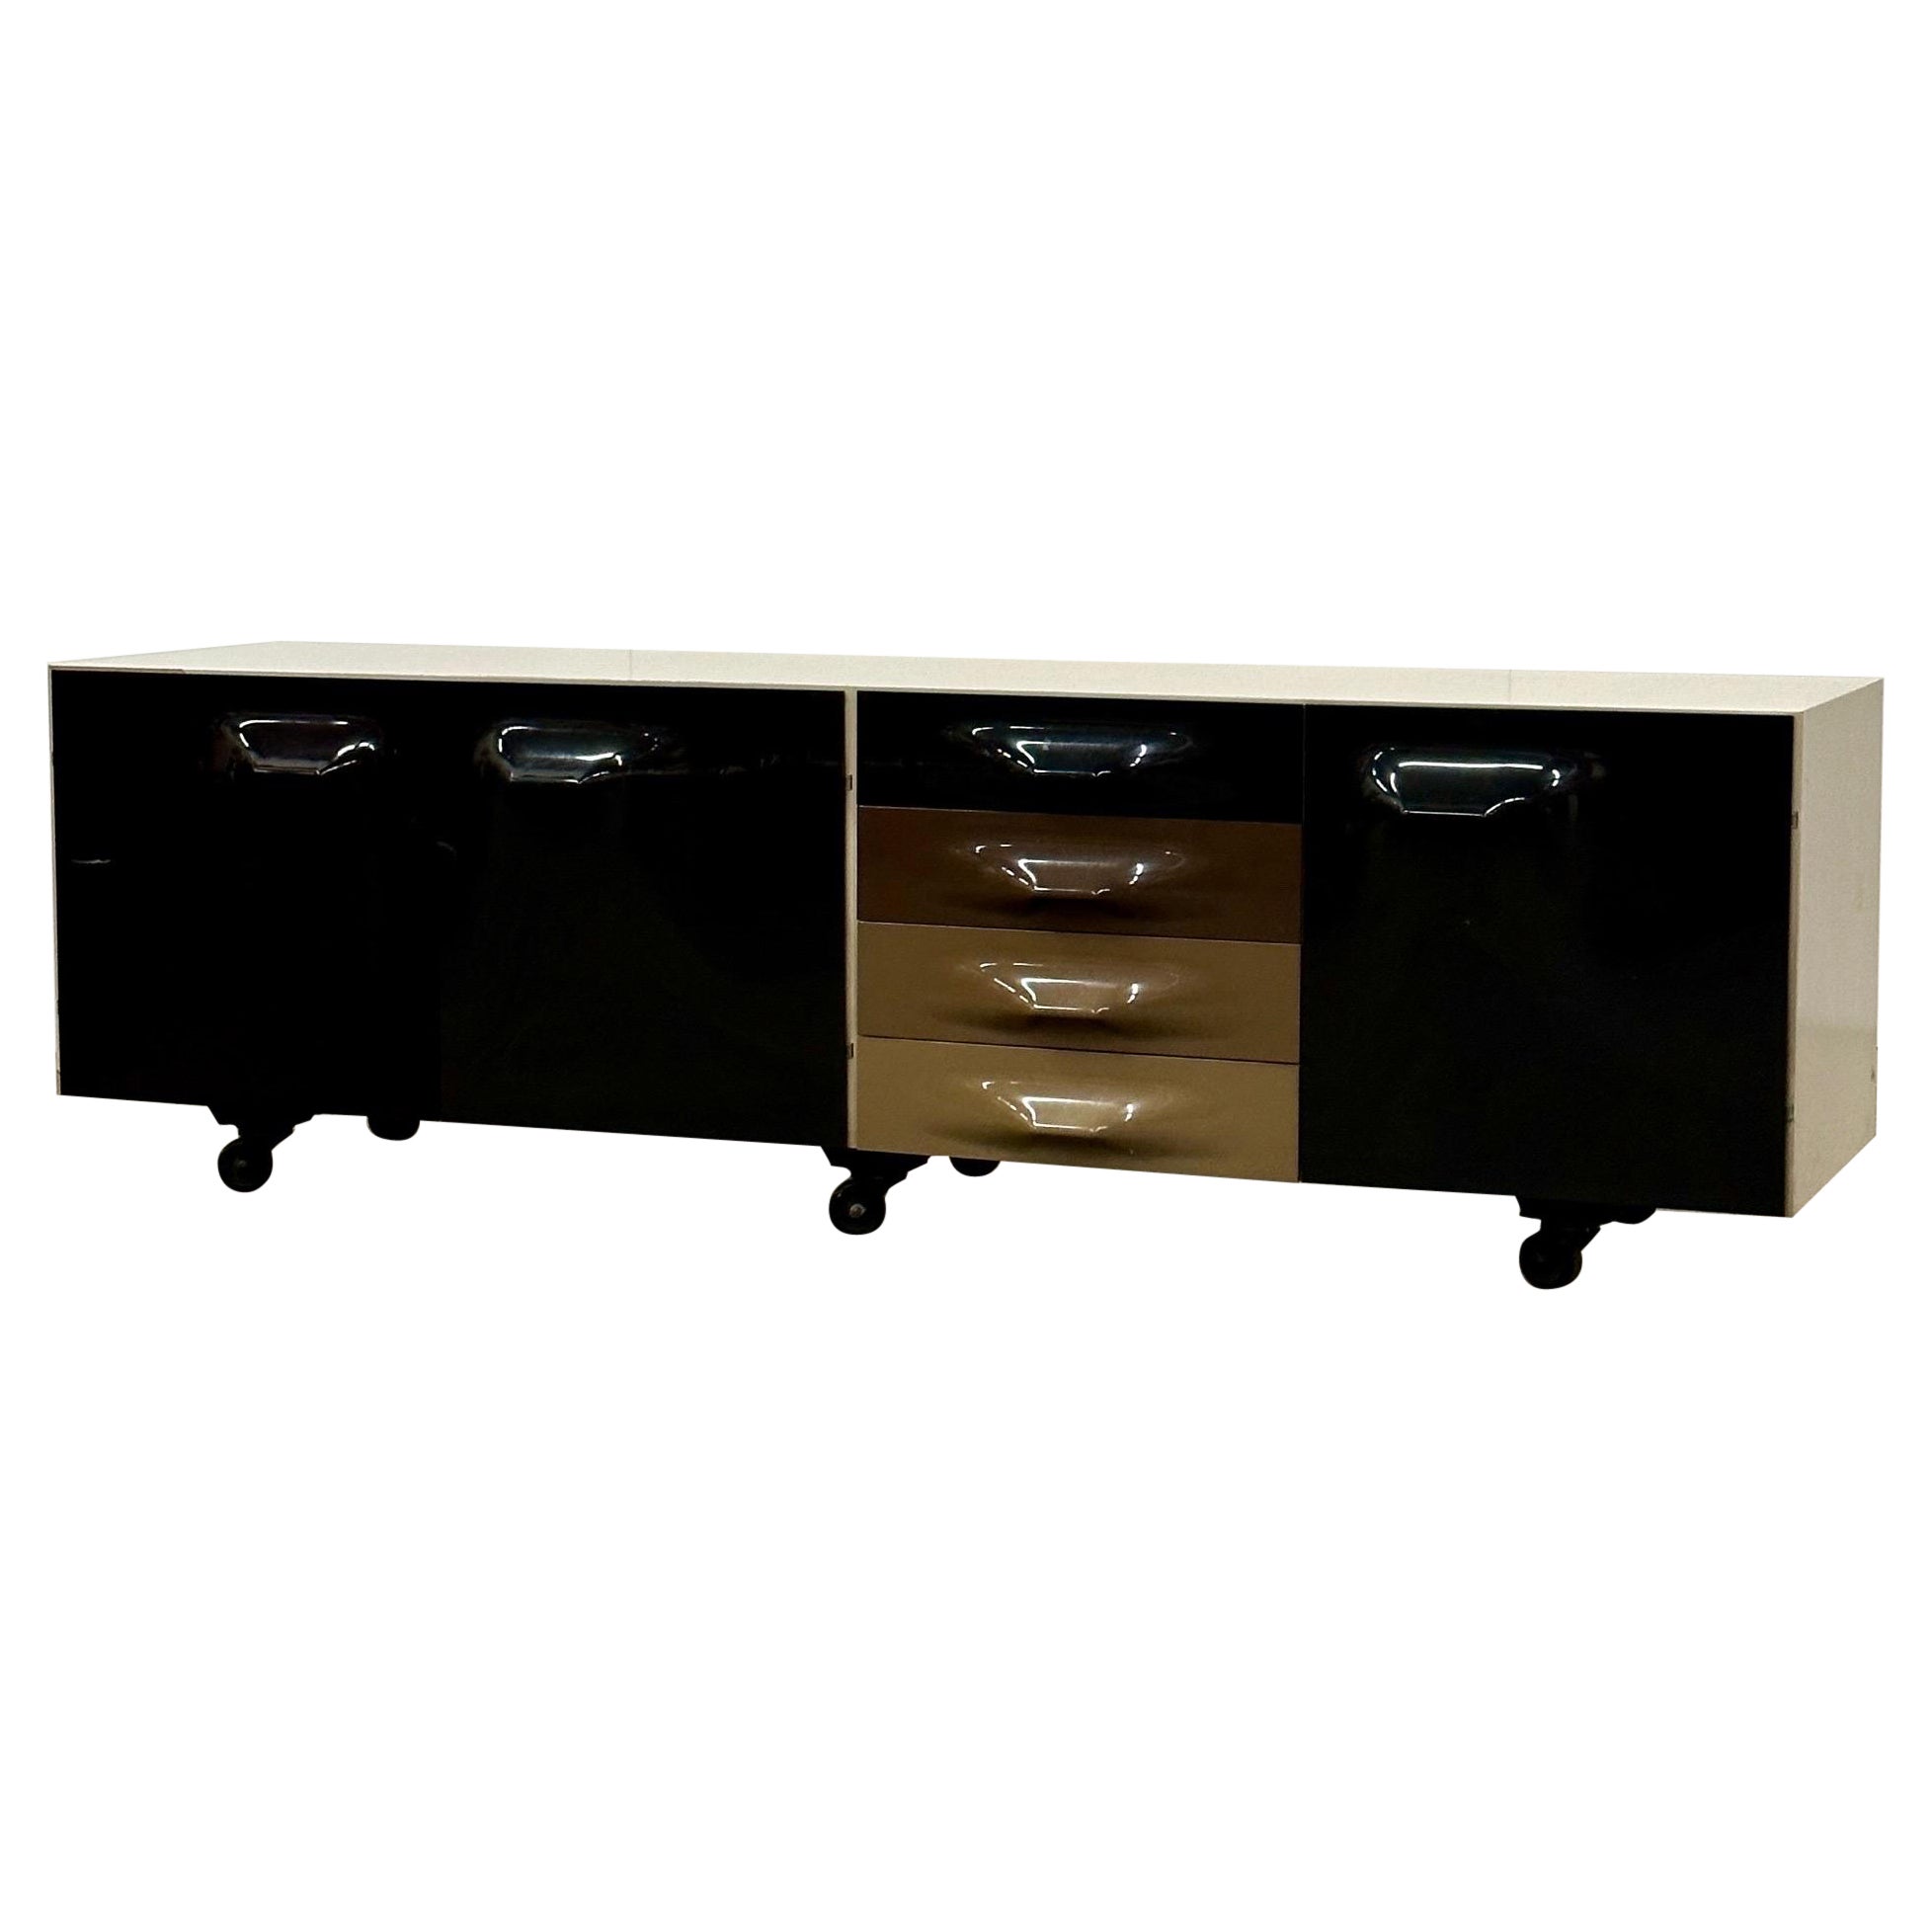 DF2000 Cabinet/Credenza by Raymond Loewy for Doubinsky Freres For Sale